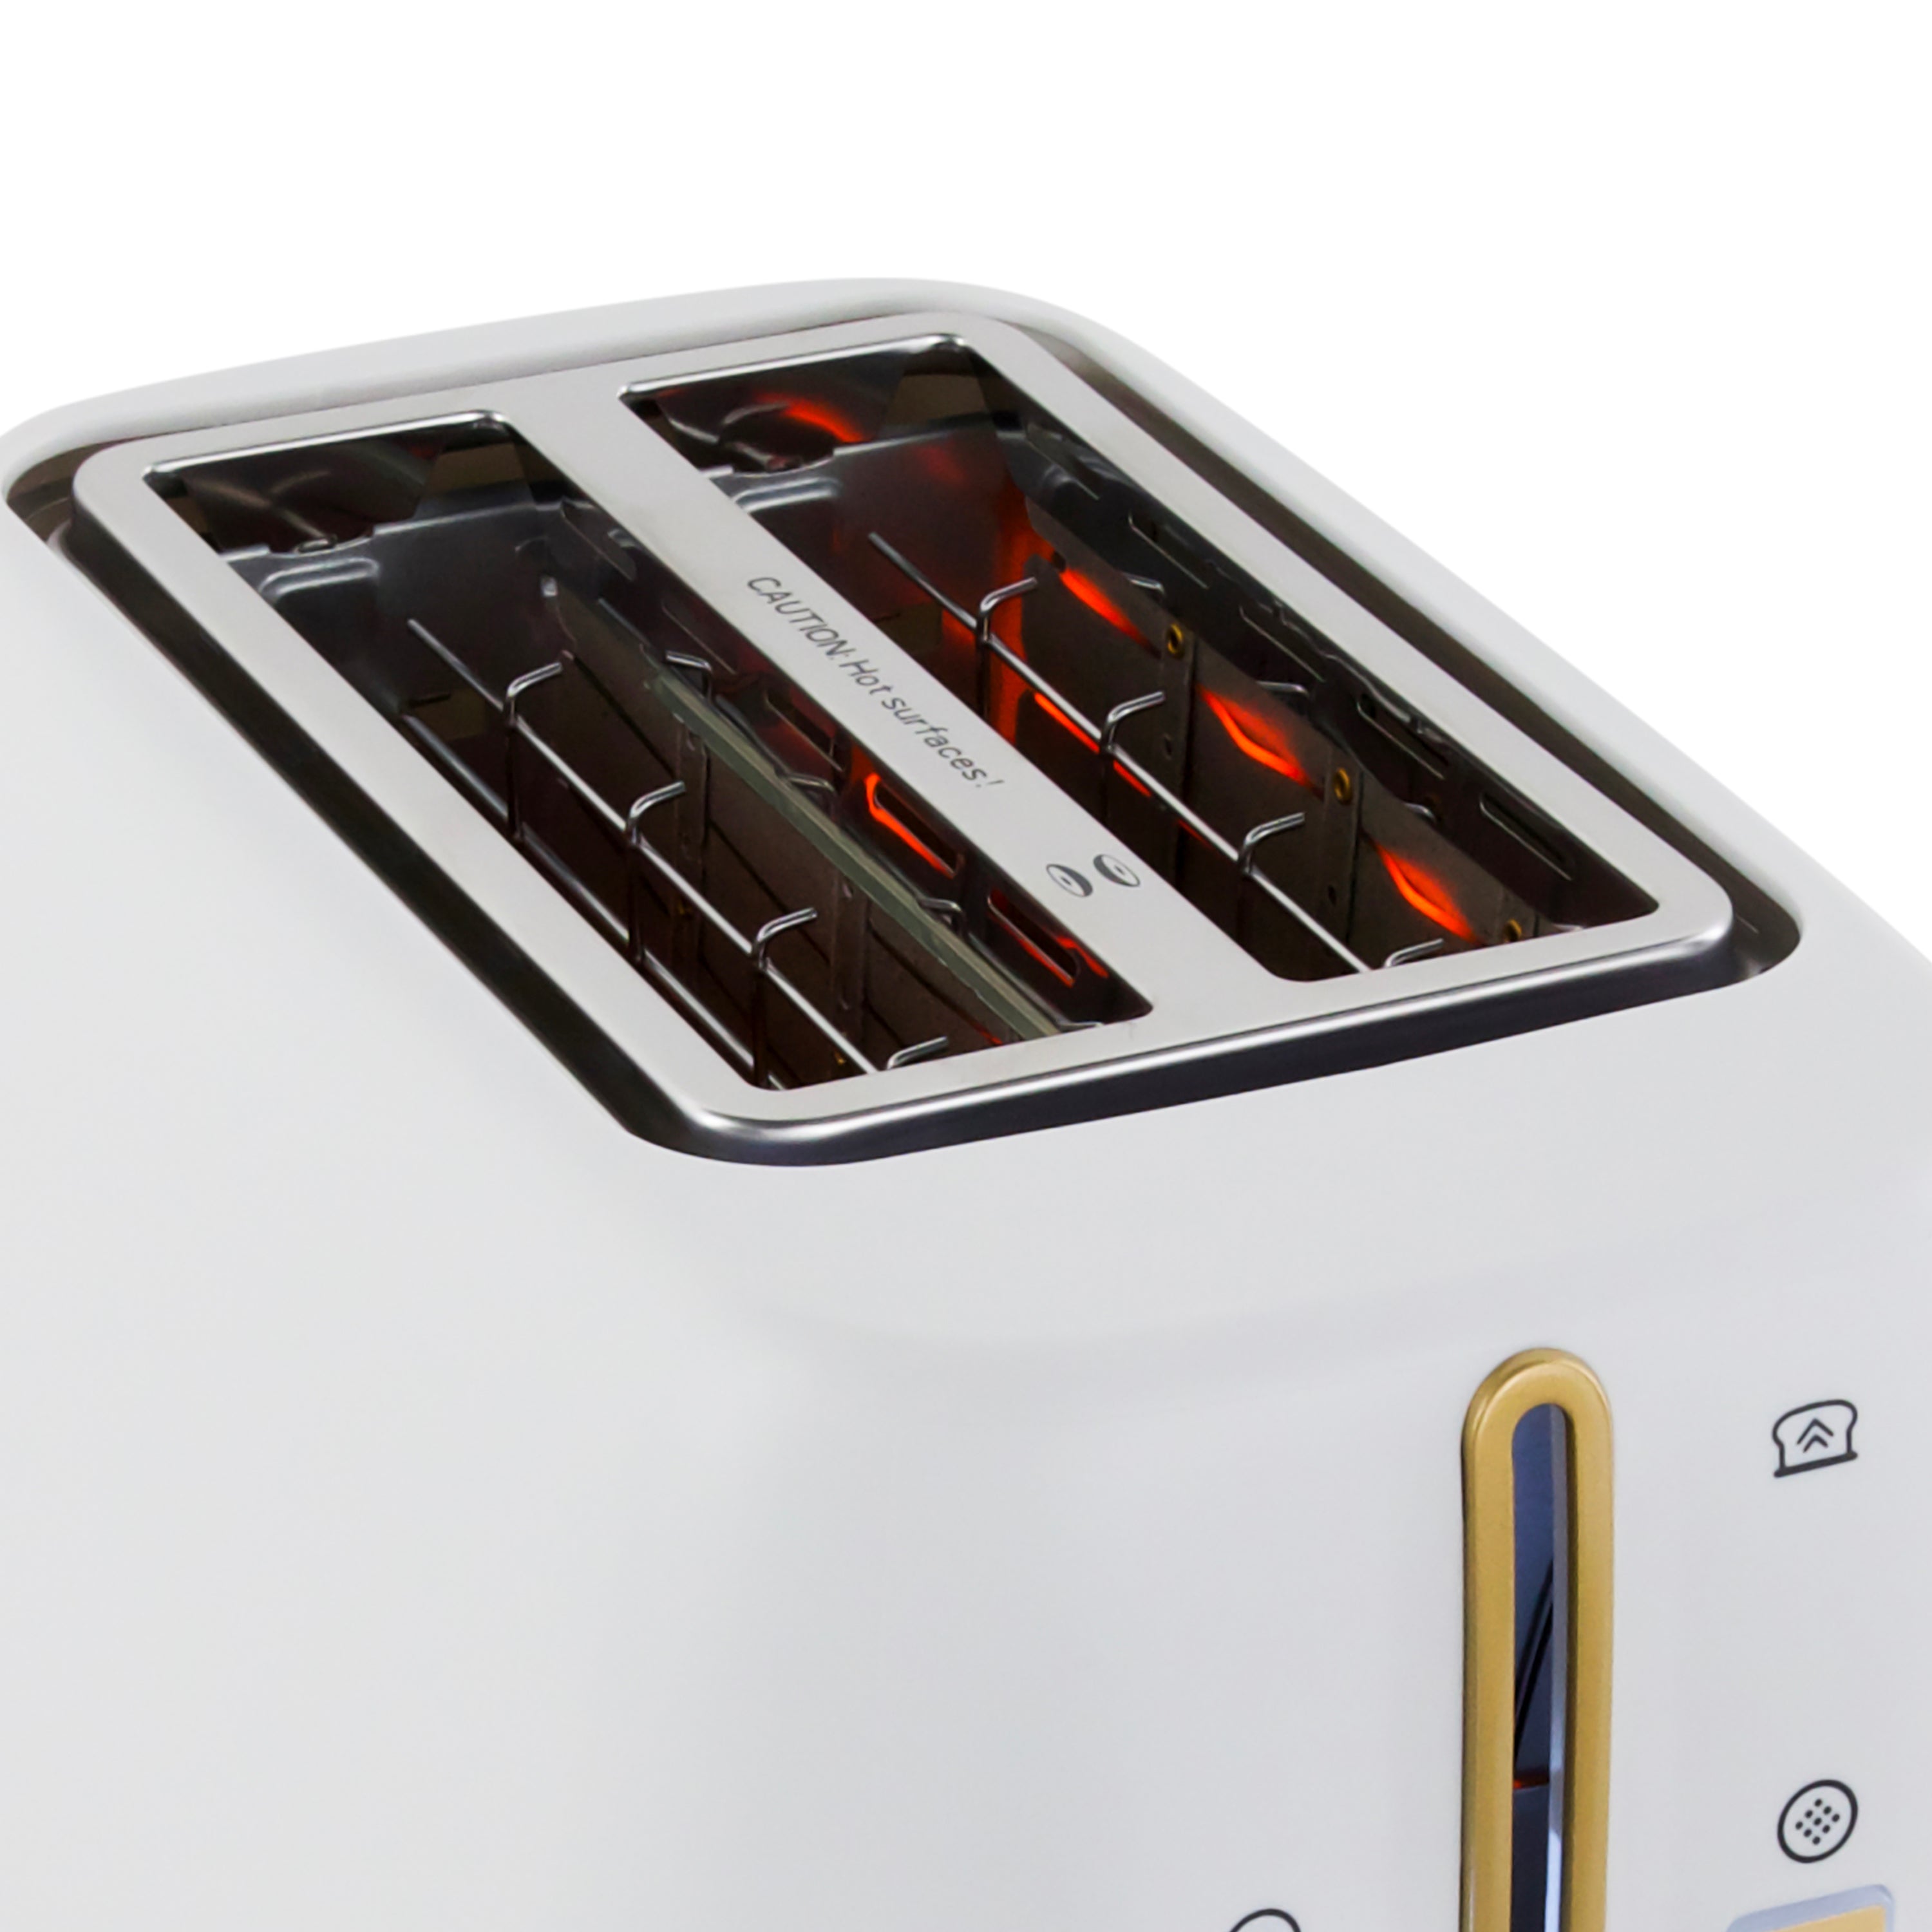 West Bend 4 Slice Toaster - White - 1 ct